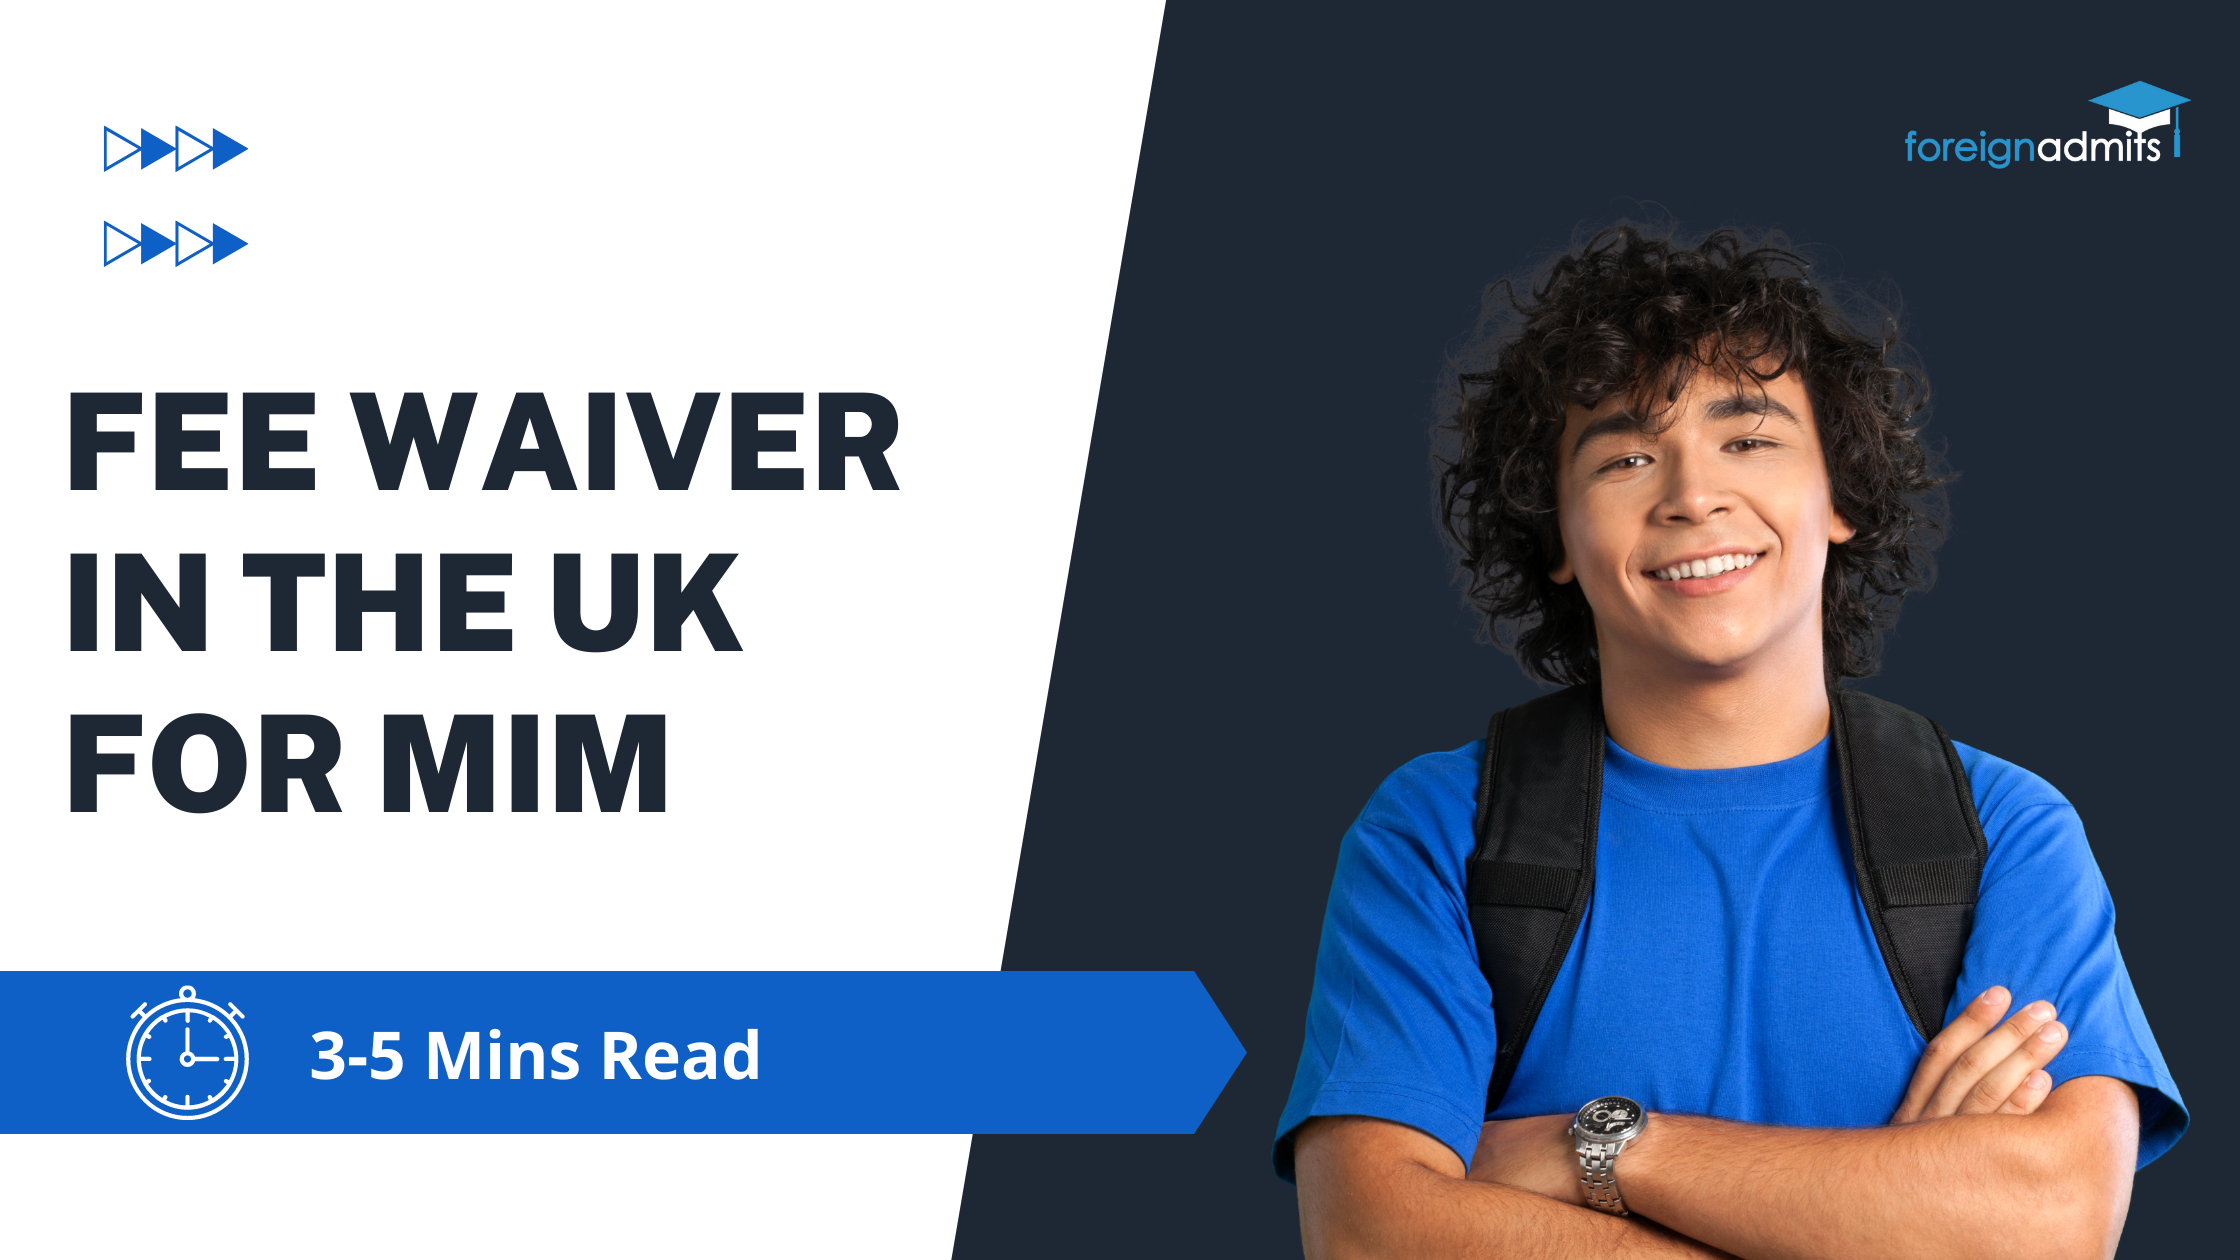 Universities that give Fee Waiver for MiM in the UK